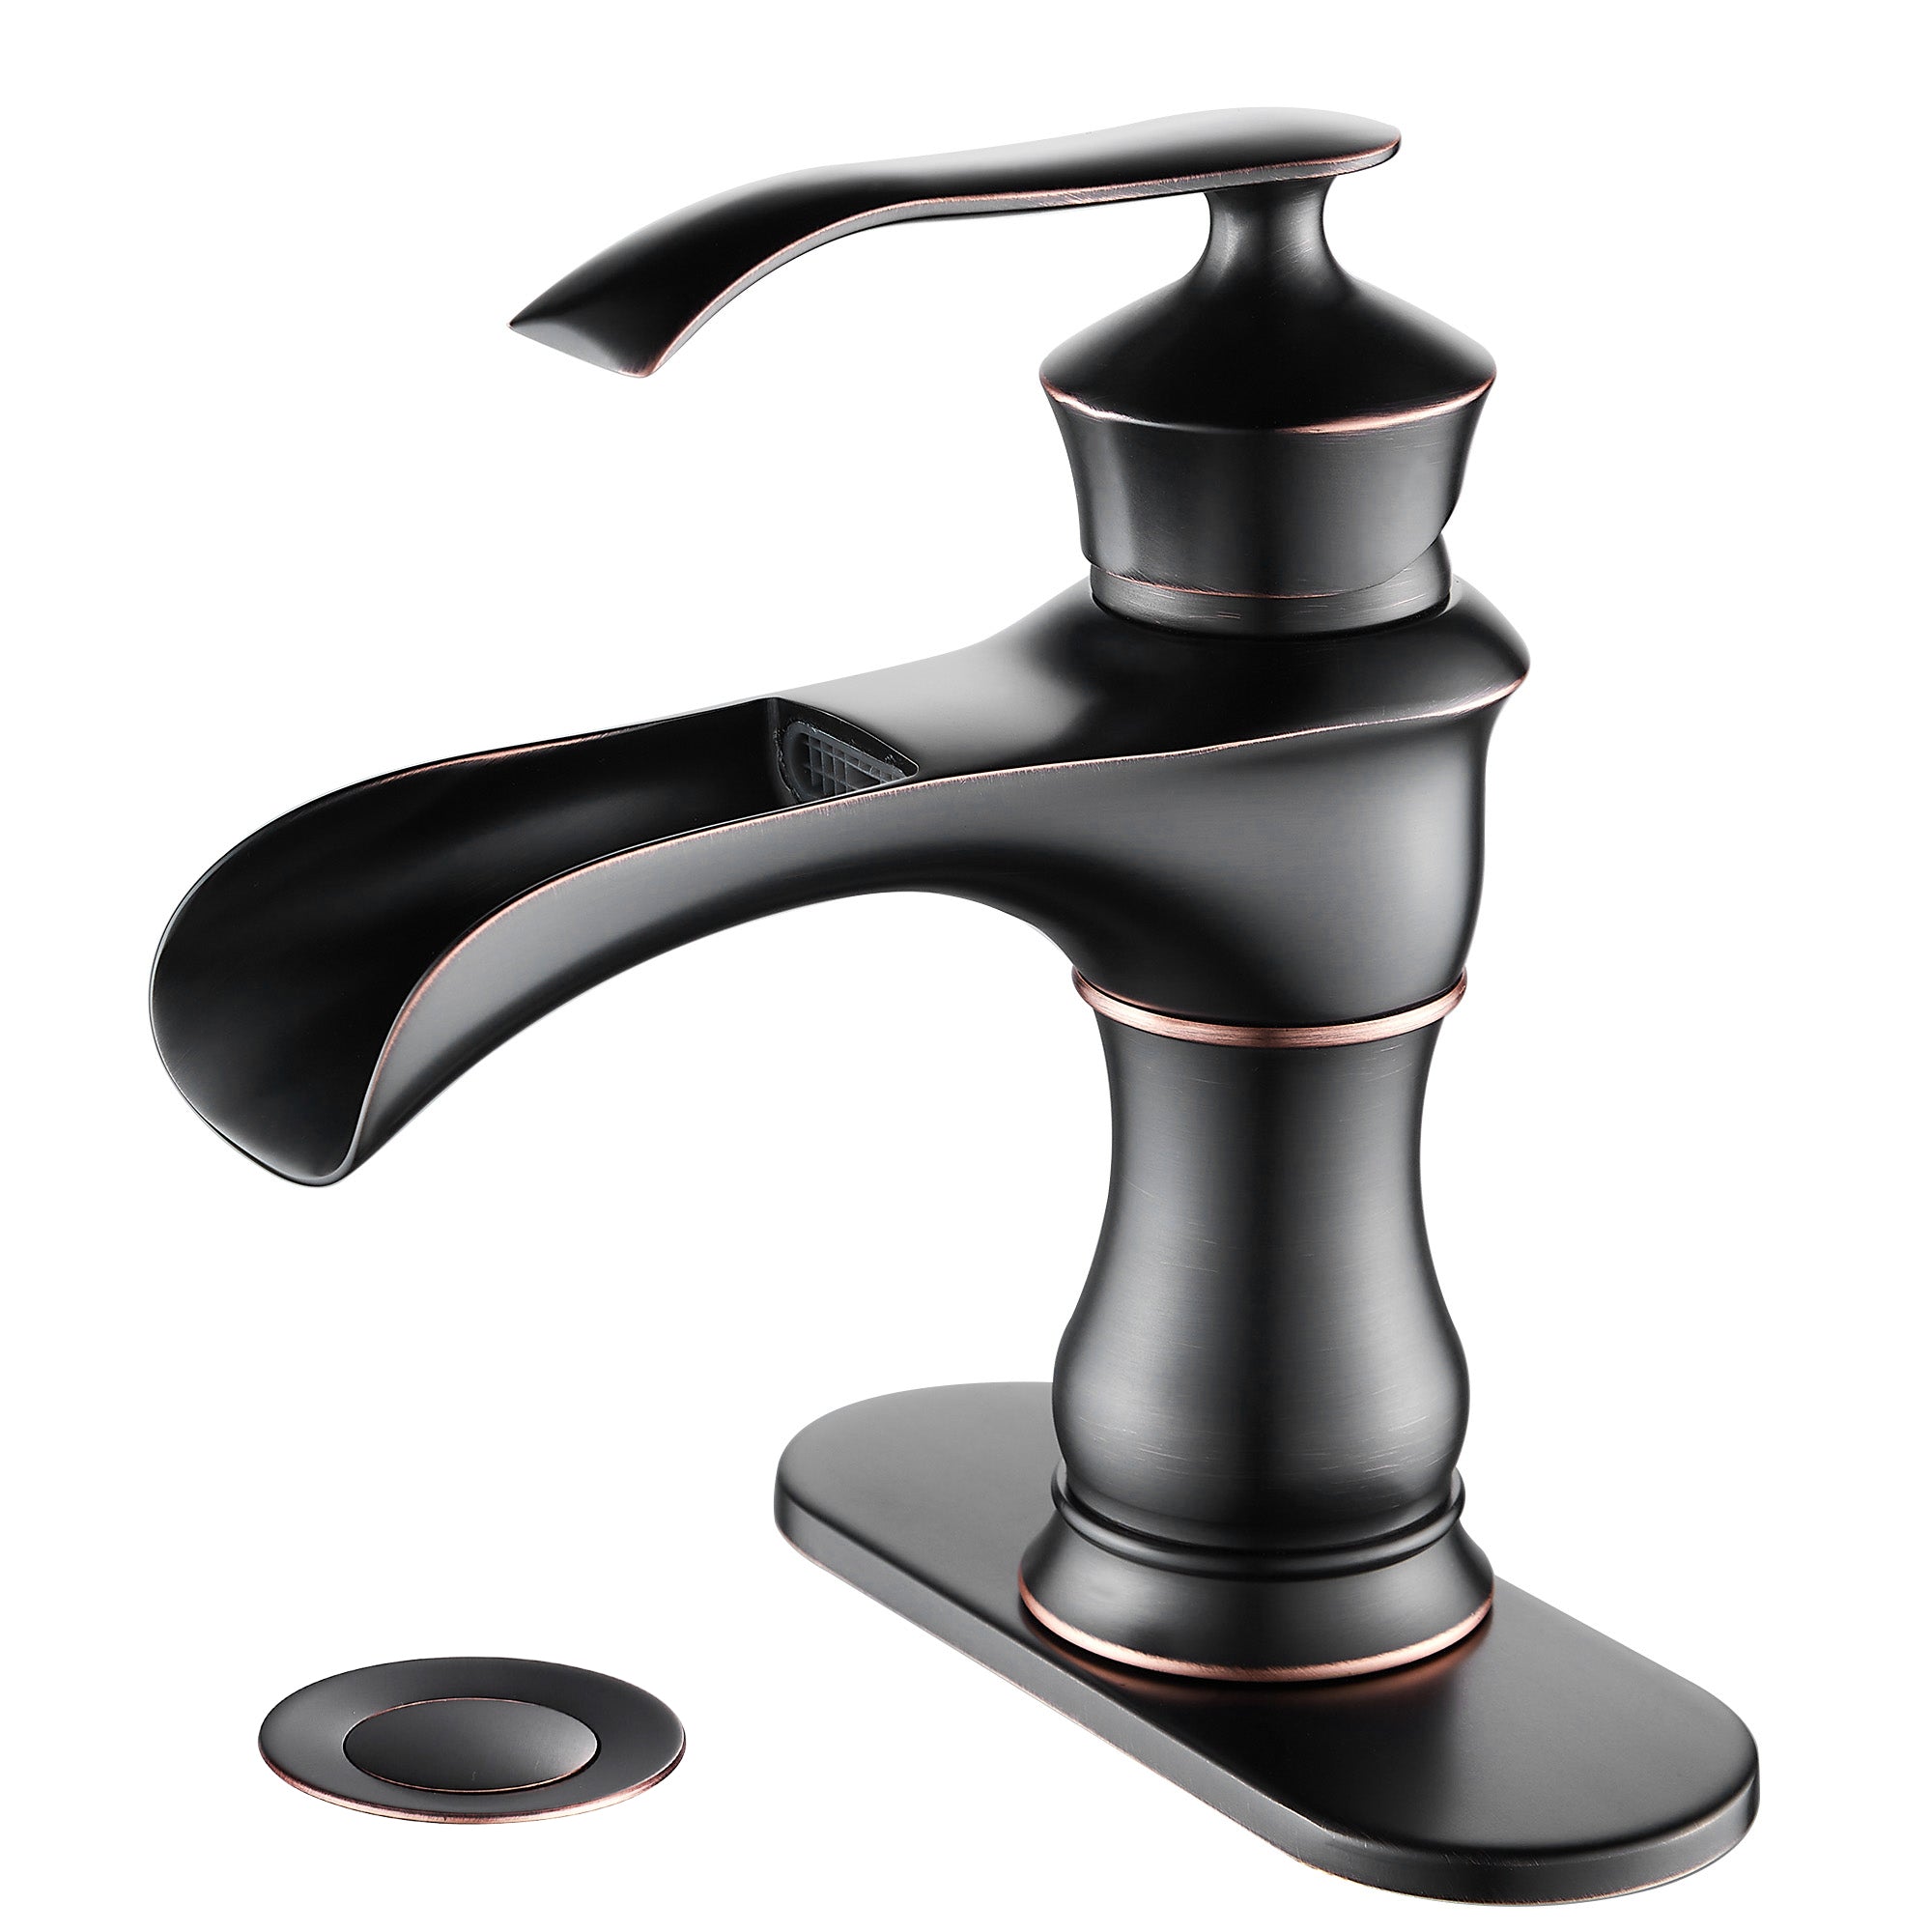 Bathroom Faucet Sink Waterfall Oil Rubbed Bronze Vanity Single Hole Mixer Tap 